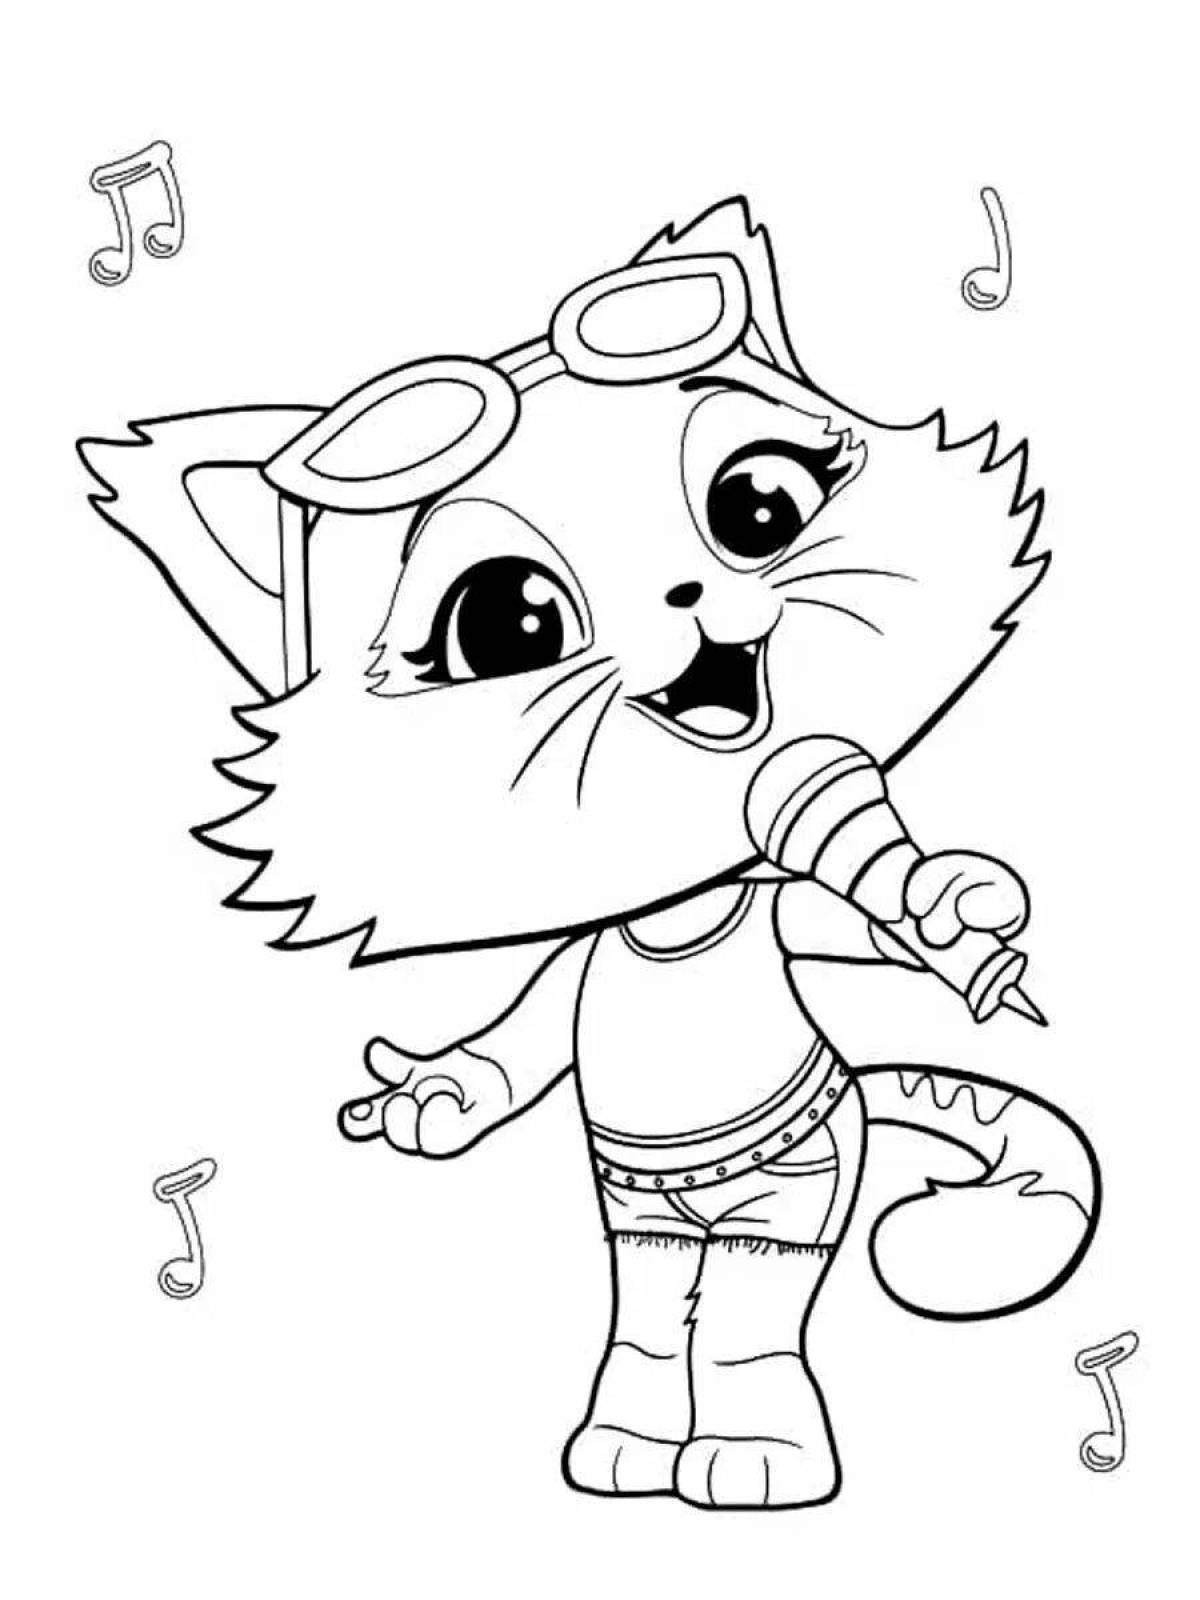 Colorful mrr meow coloring page